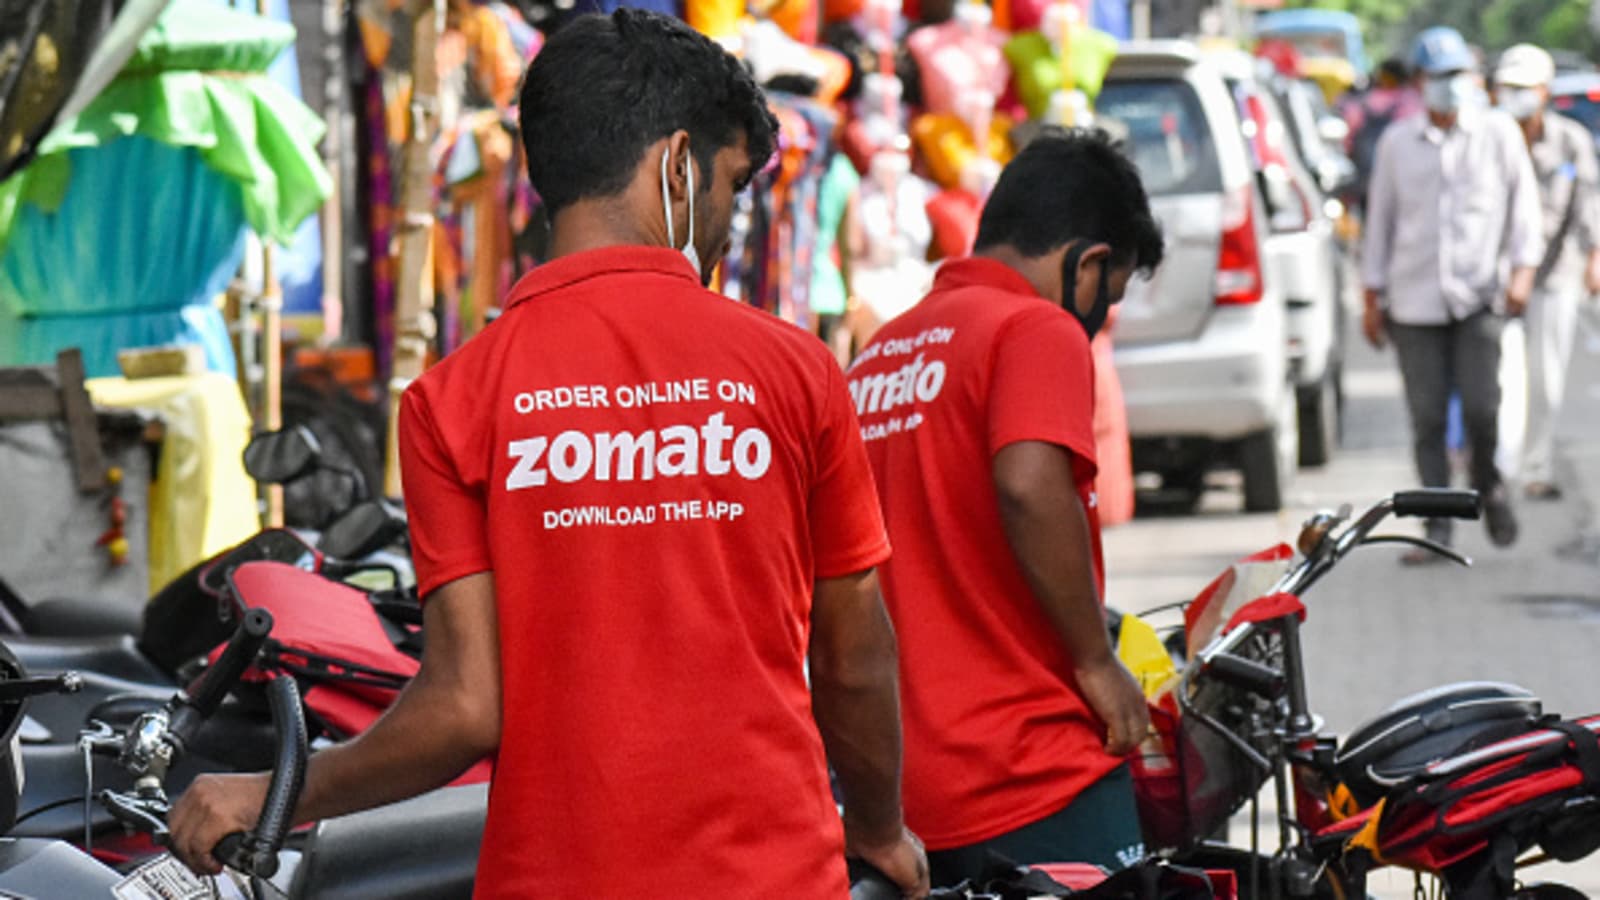 Swiggy, Zomato to collect 5% GST from customers starting 1st Jan, 2022.